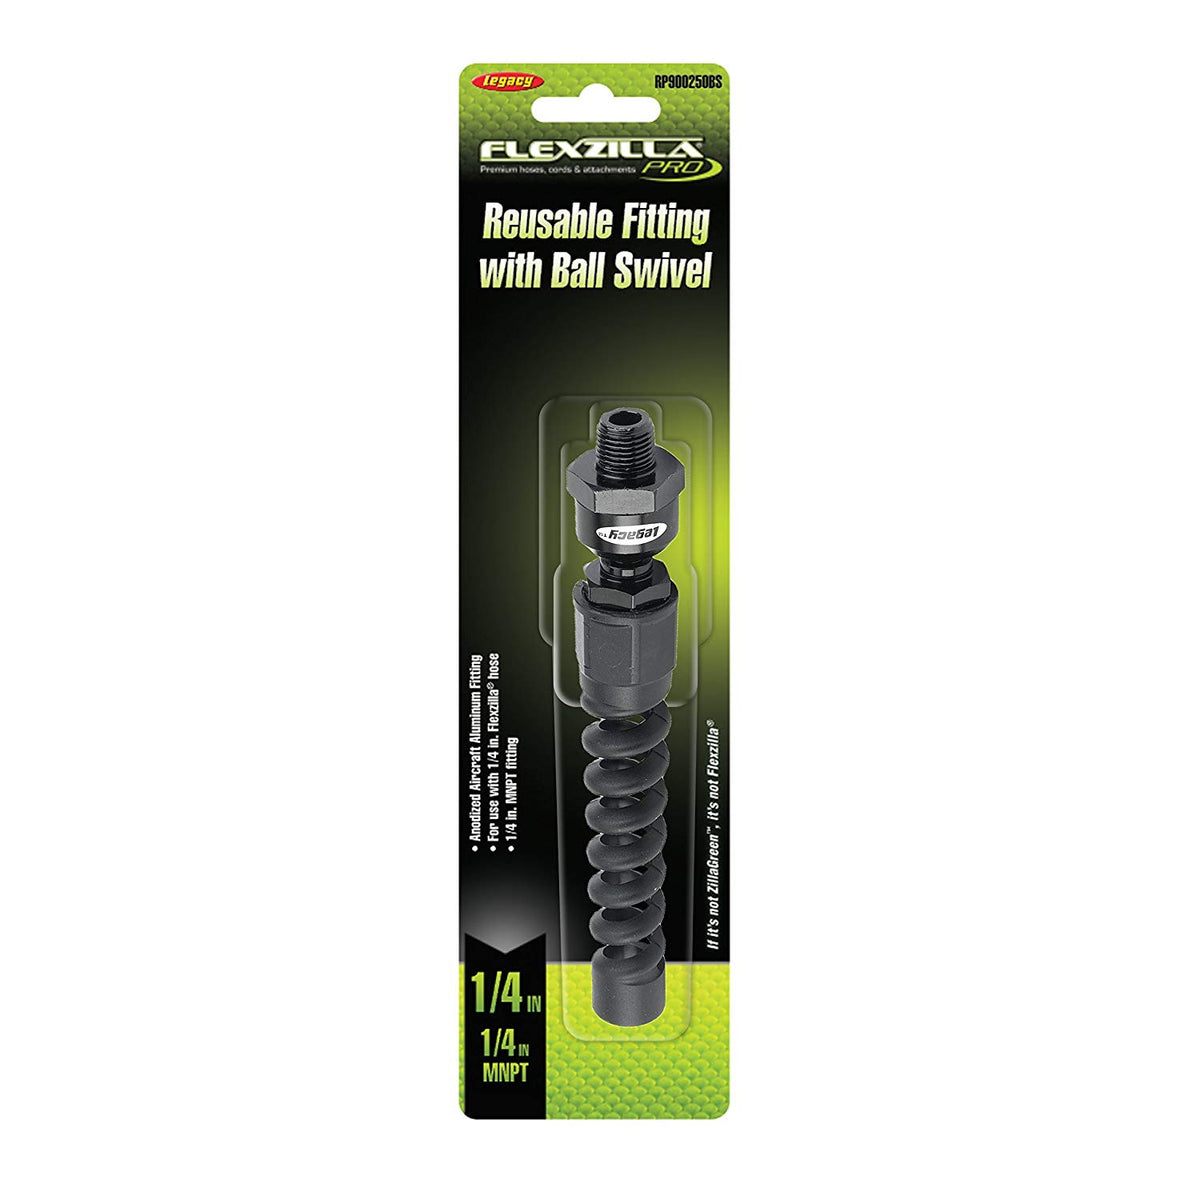 Flexzilla Pro RP900250BS Air Hose Reusable Fitting with Ball Swivel, 1/4", 1/4" MNPT